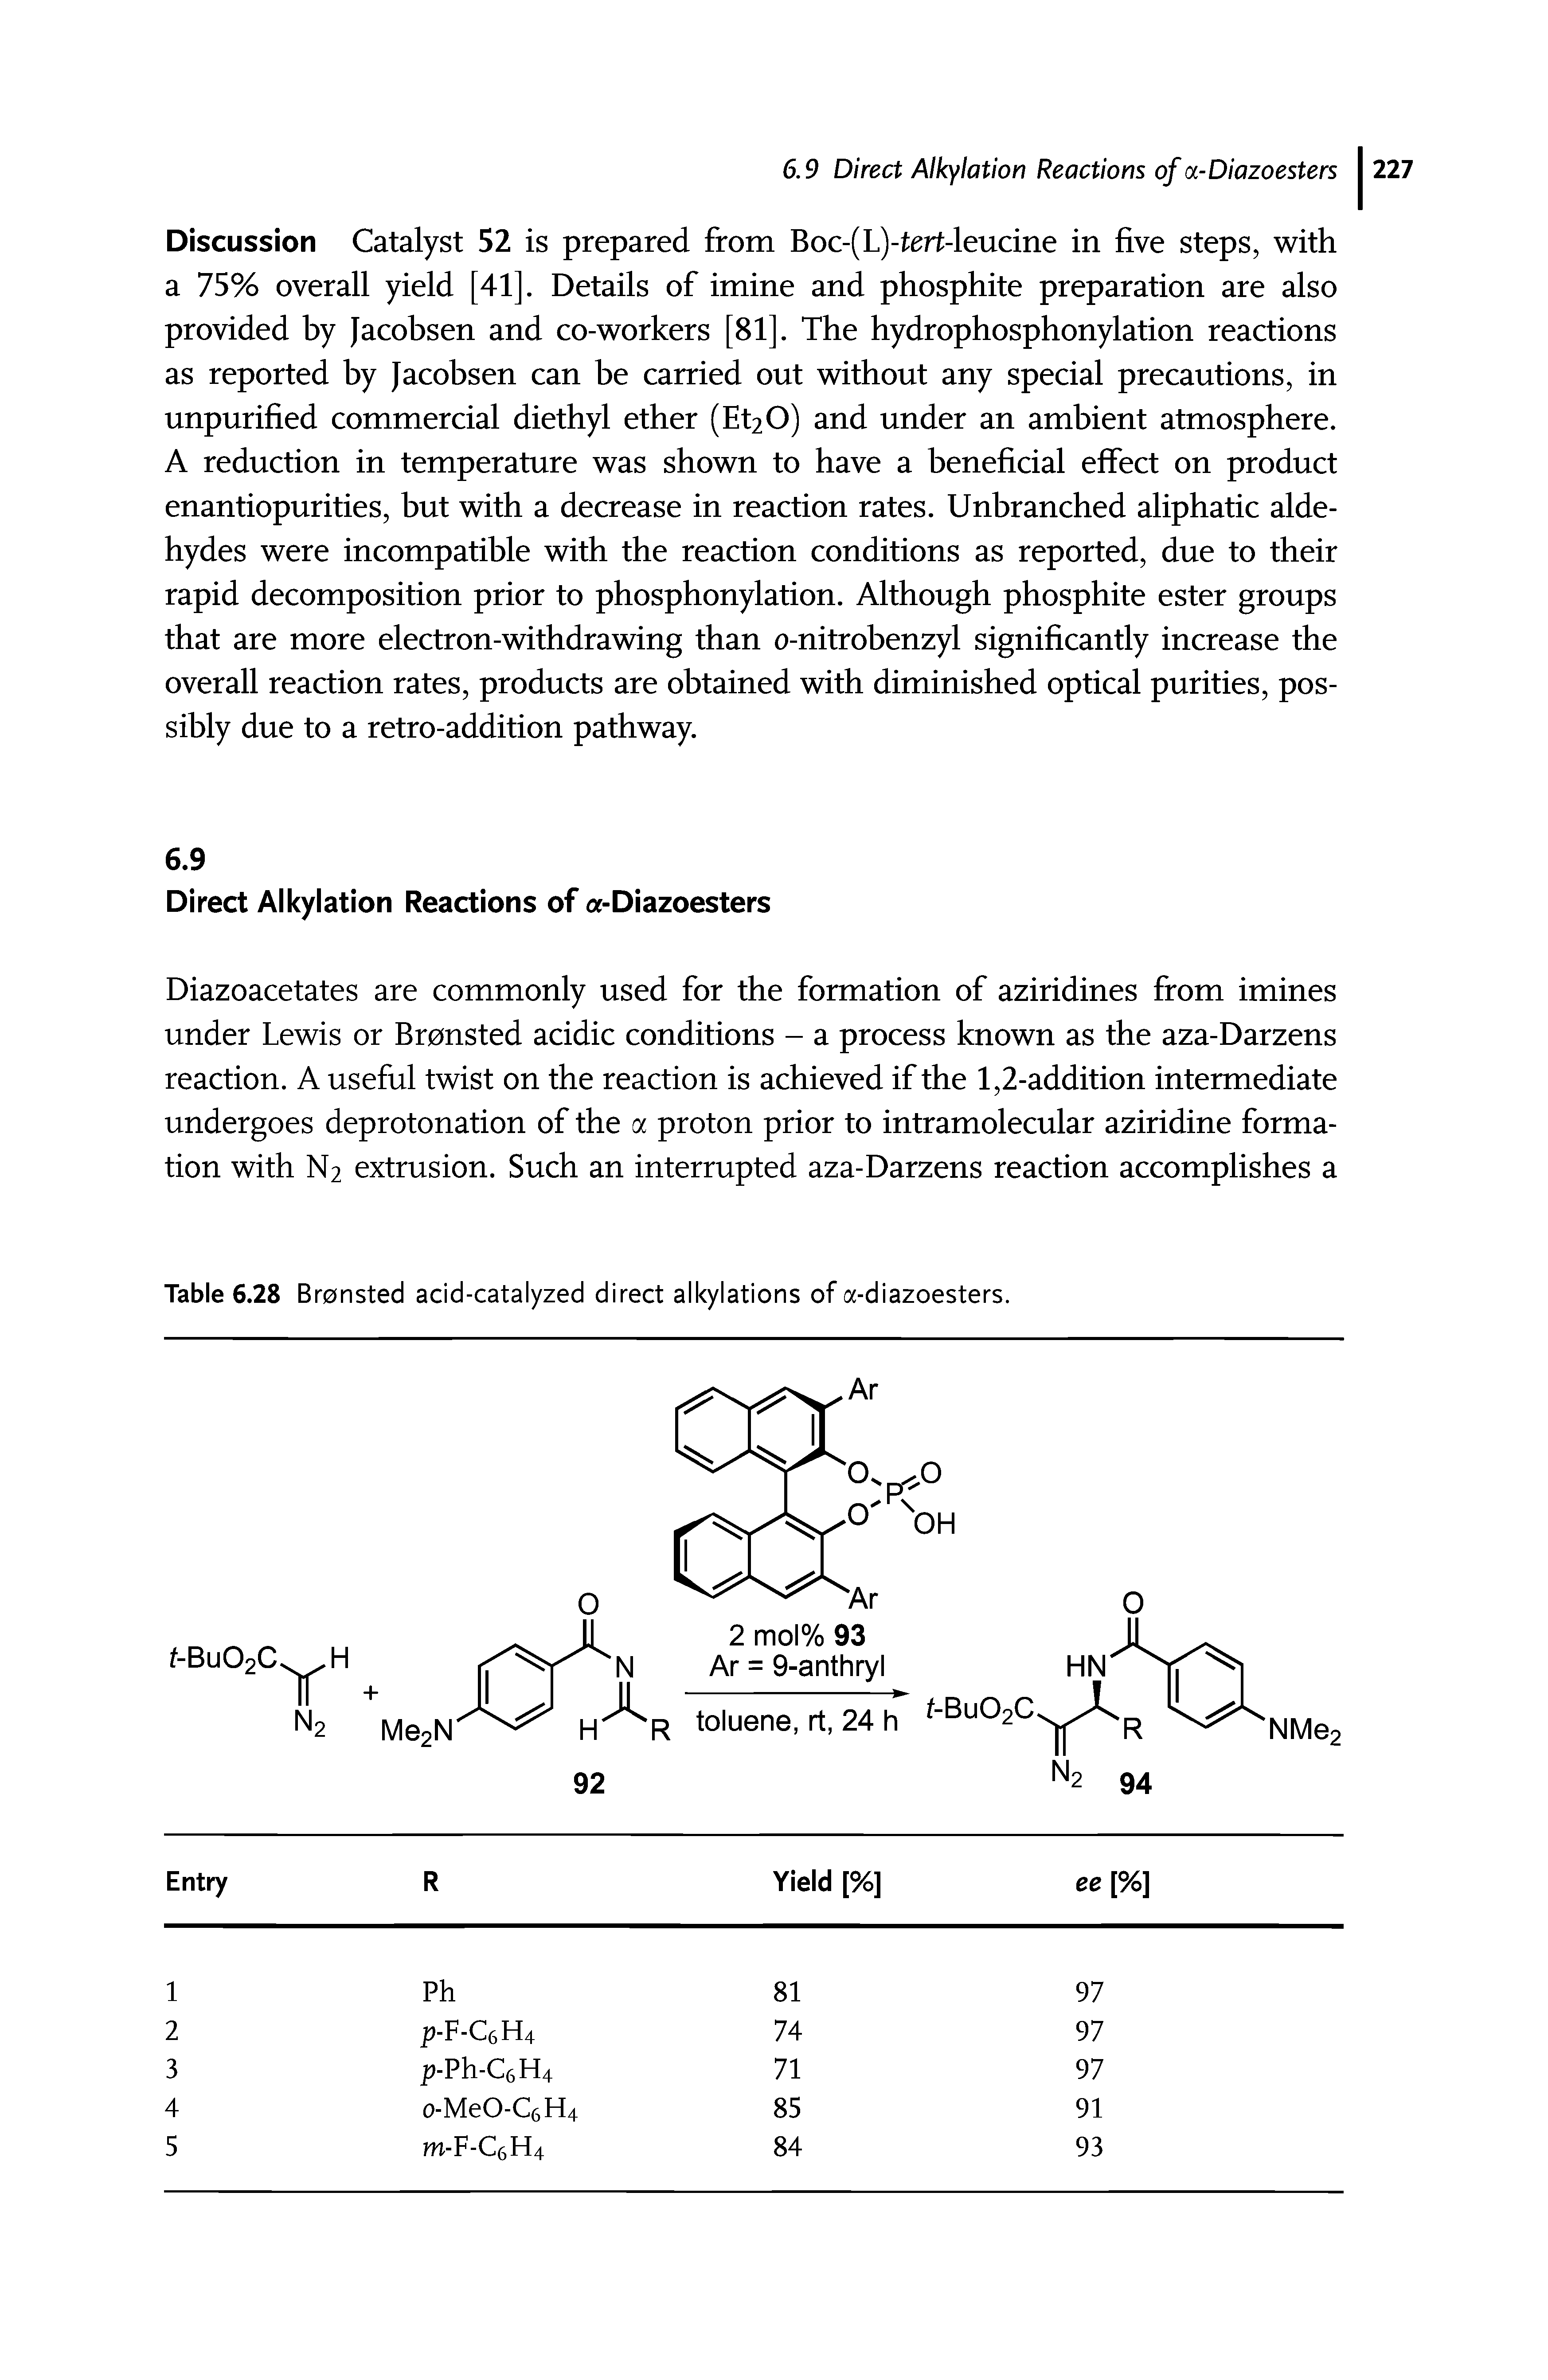 Table 6.28 Bransted acid-catalyzed direct alkylations of a-diazoesters.